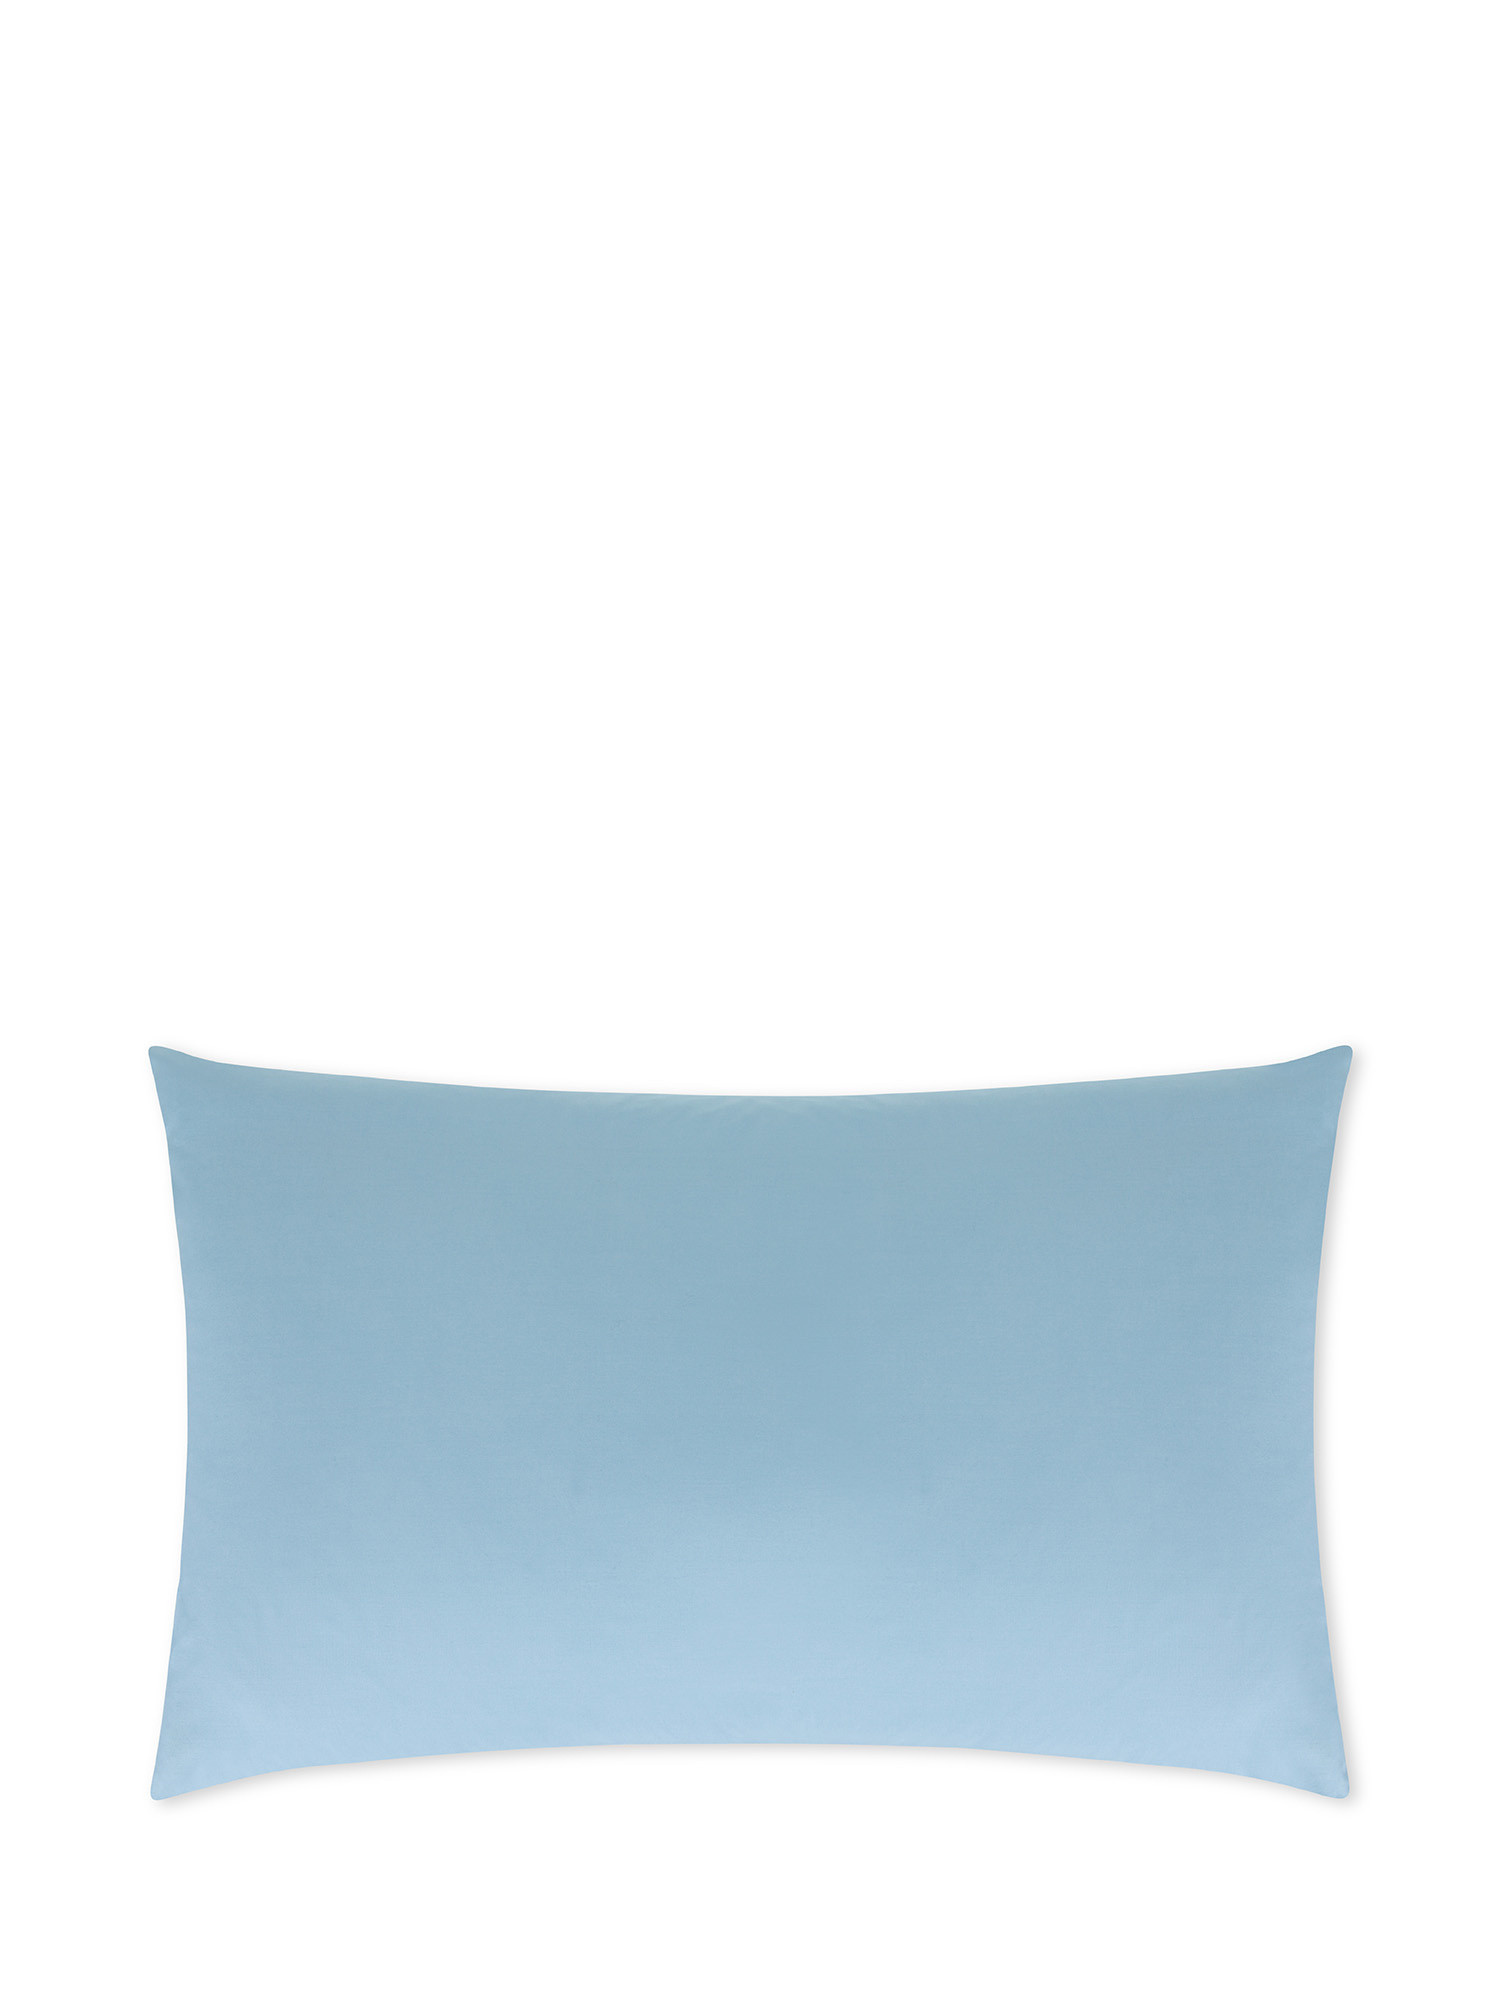 Solid color cotton percale pillowcase, Blue, large image number 0